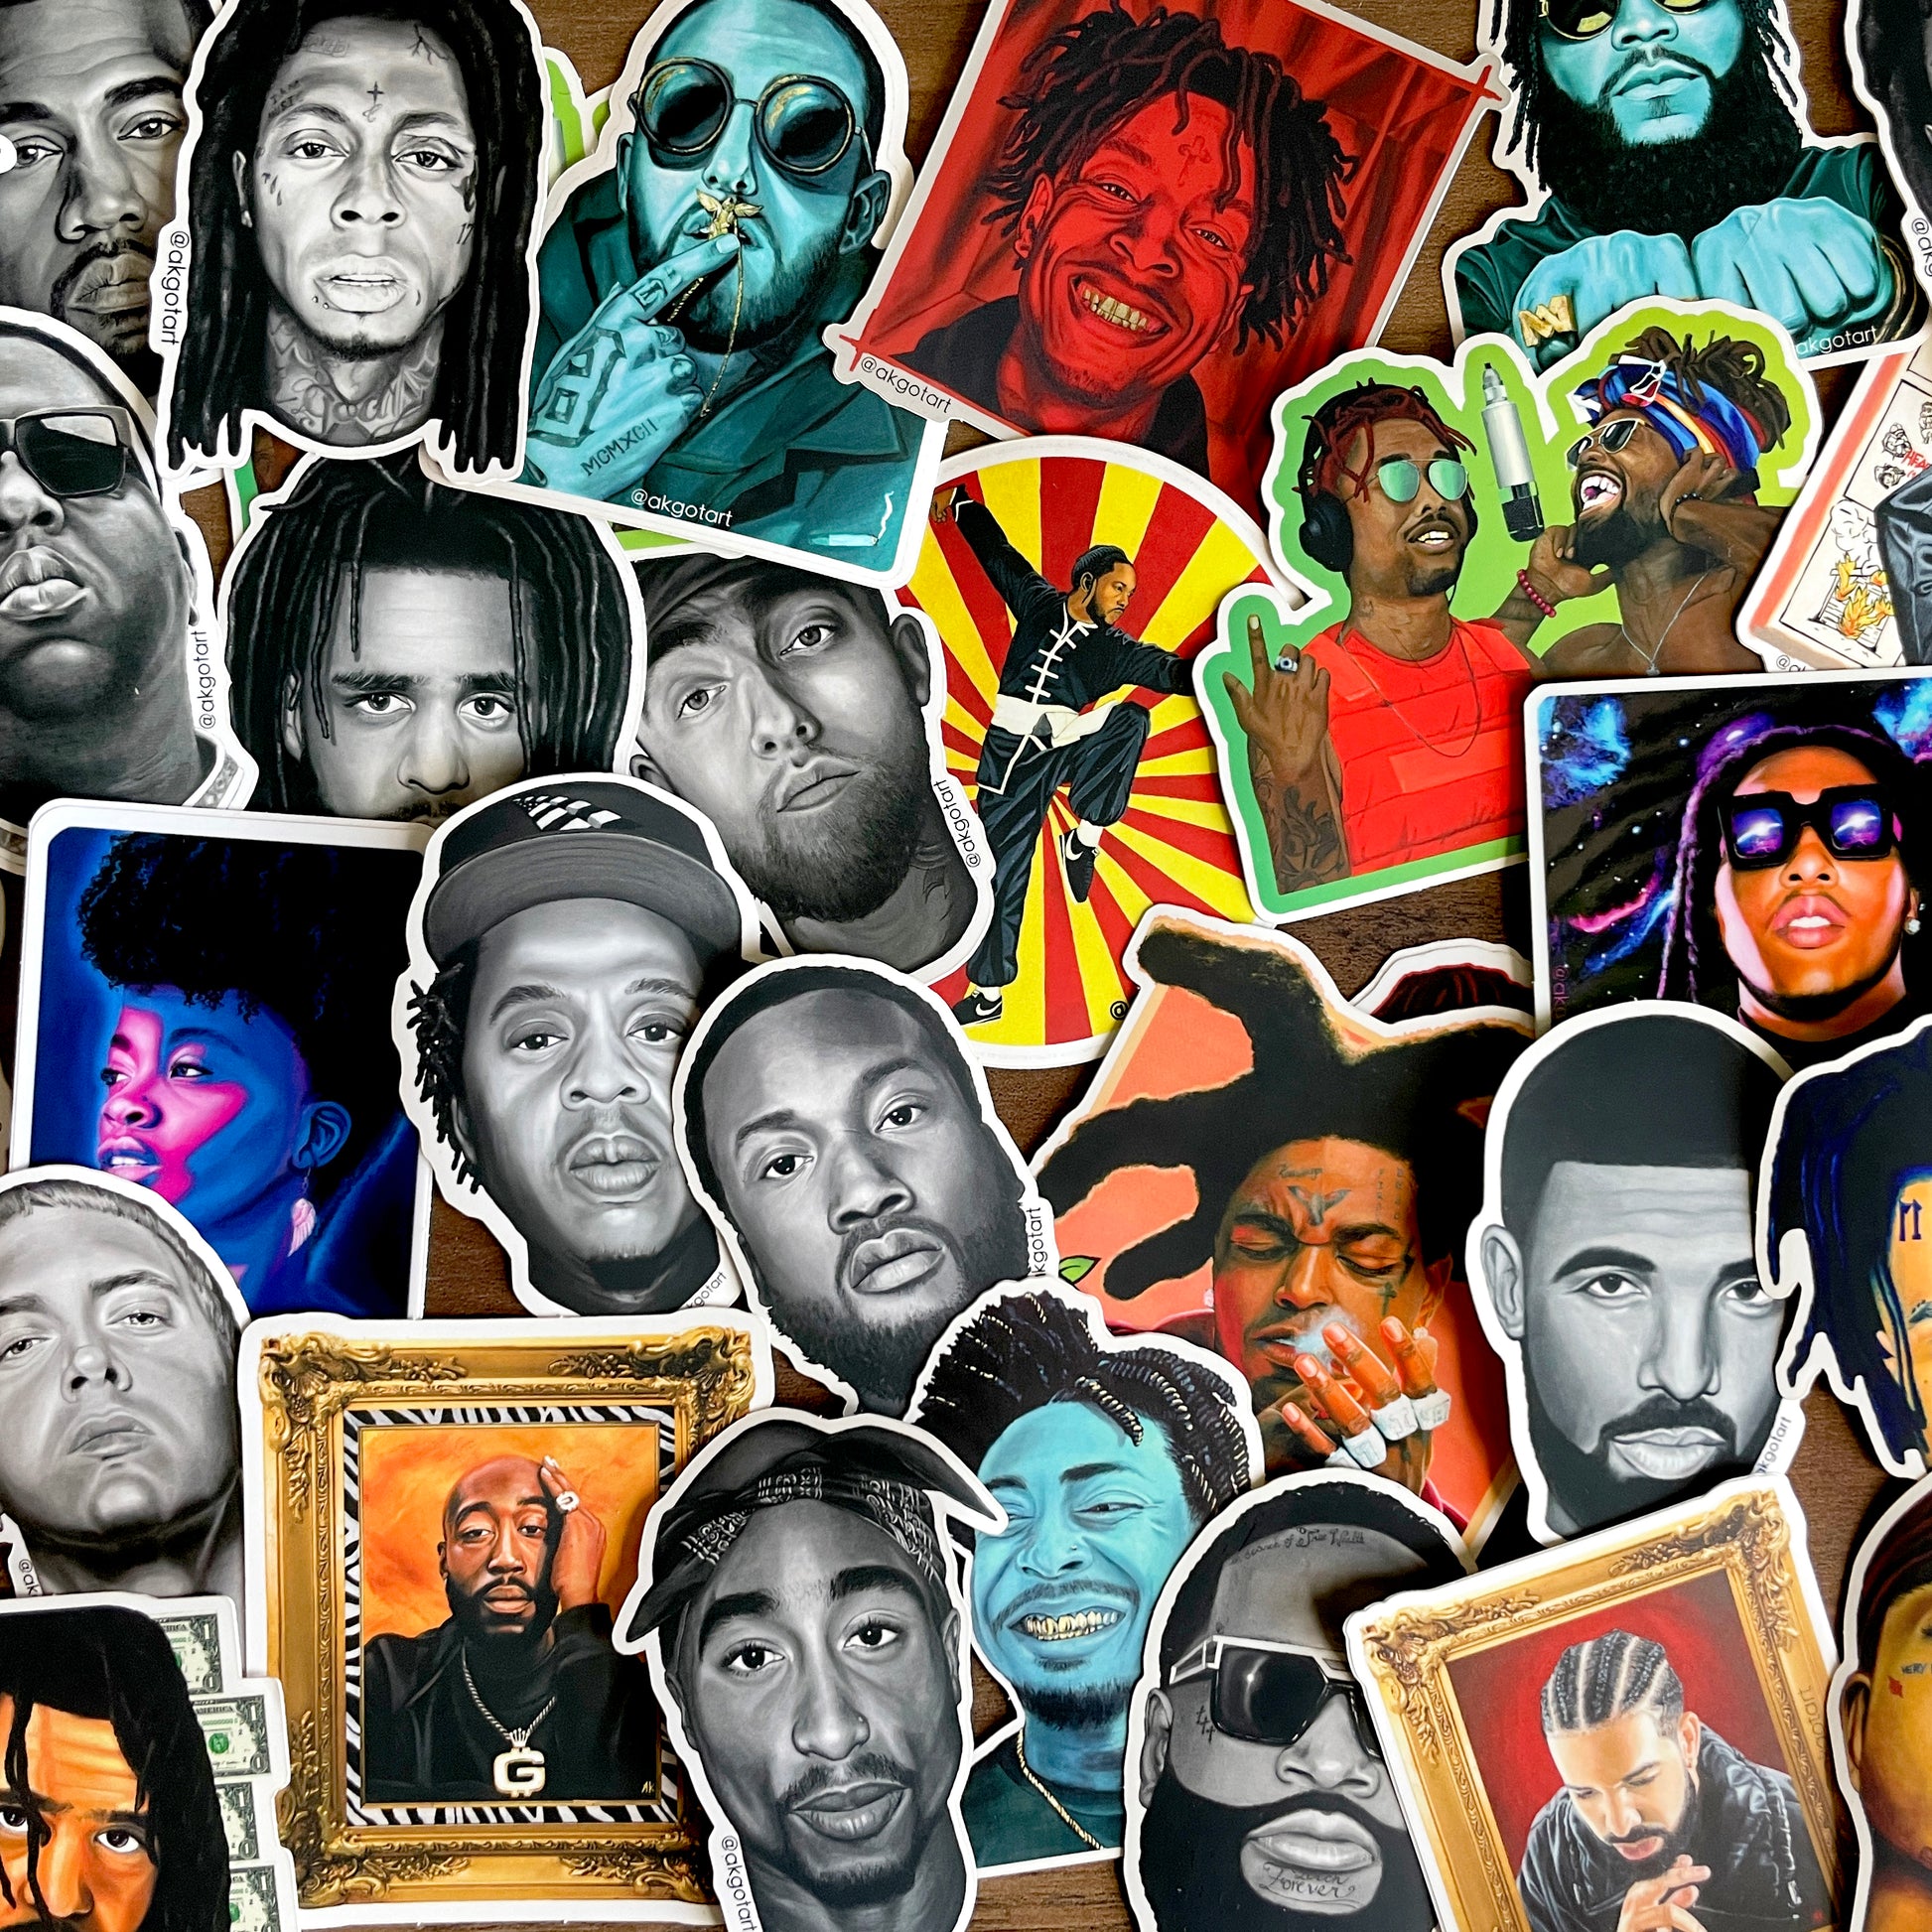 Nipsey Hussle Stickers for Sale